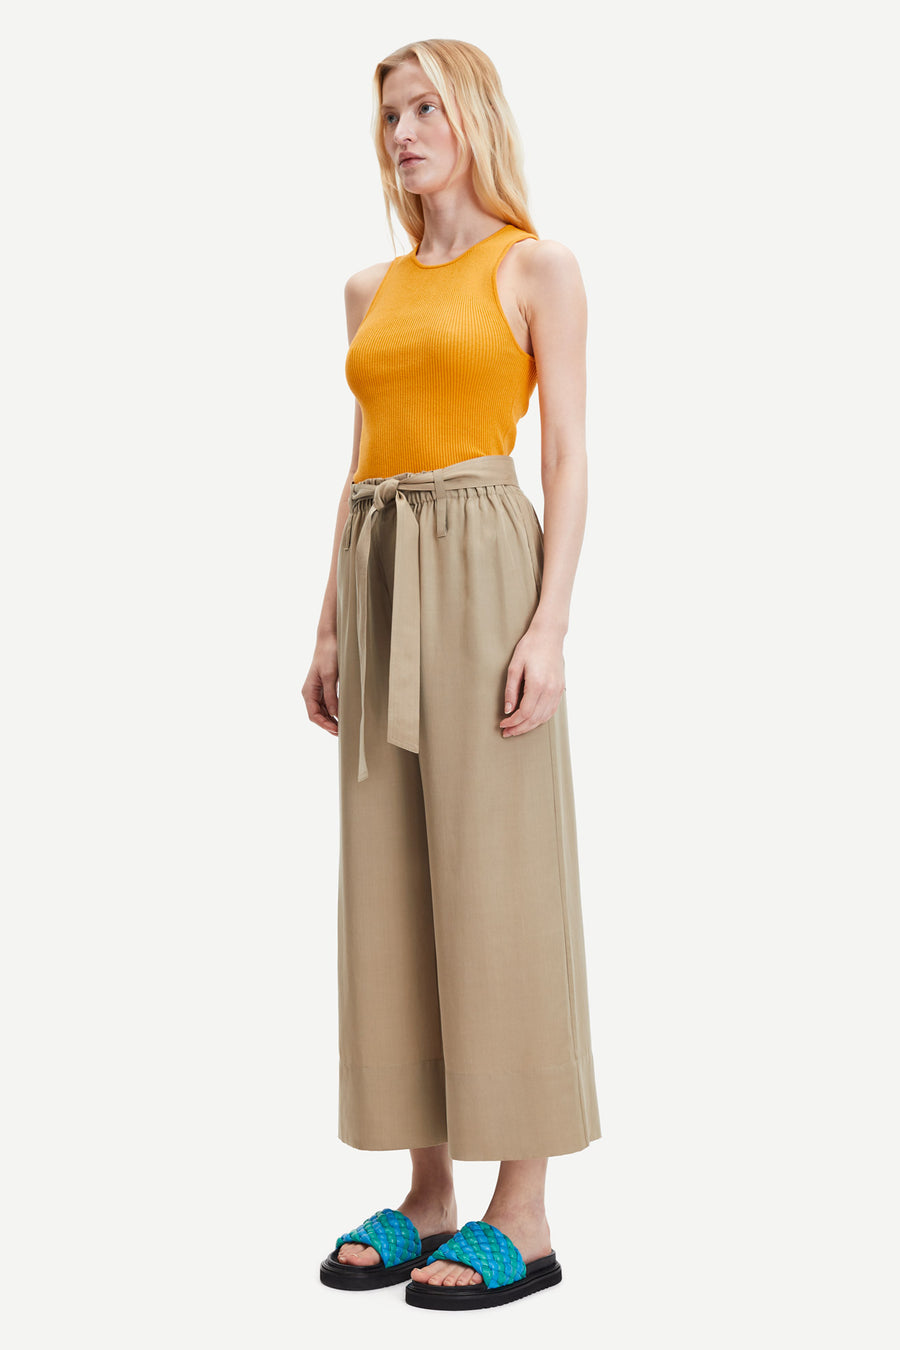 EVERLY TOP IN RADIANT YELLOW - SOMMER STRICK TOP IN ORANGE